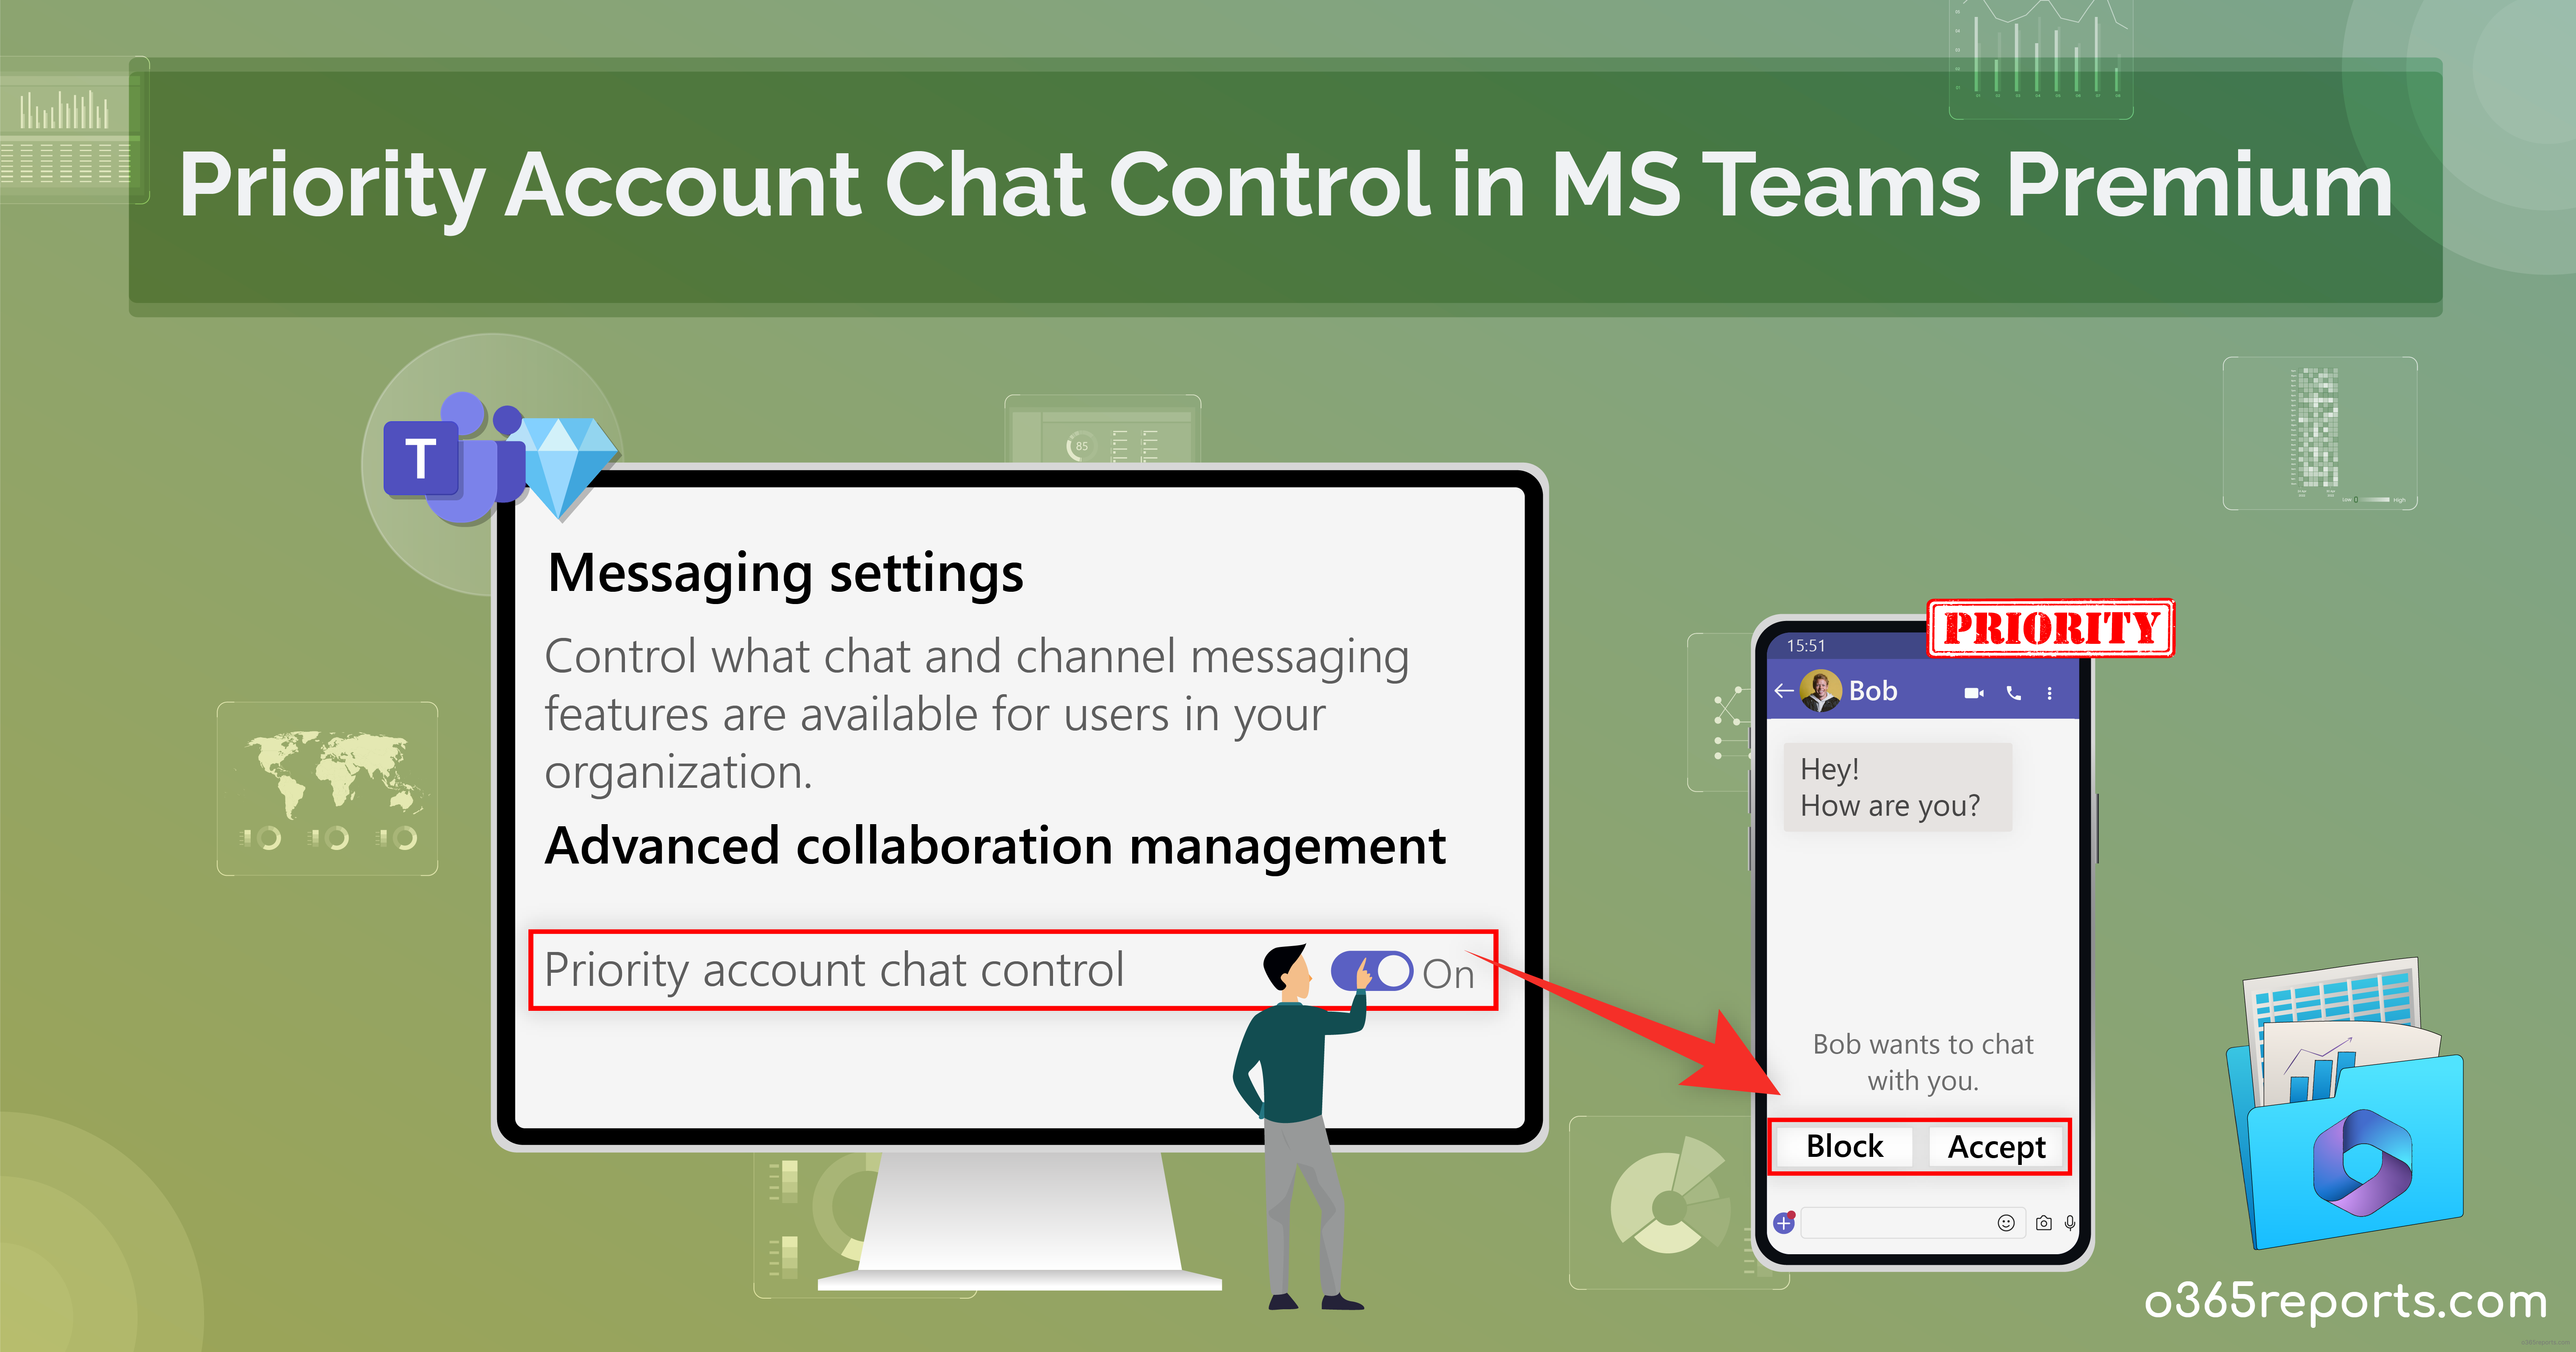 Priority Account Chat Controls in MS Teams Premium